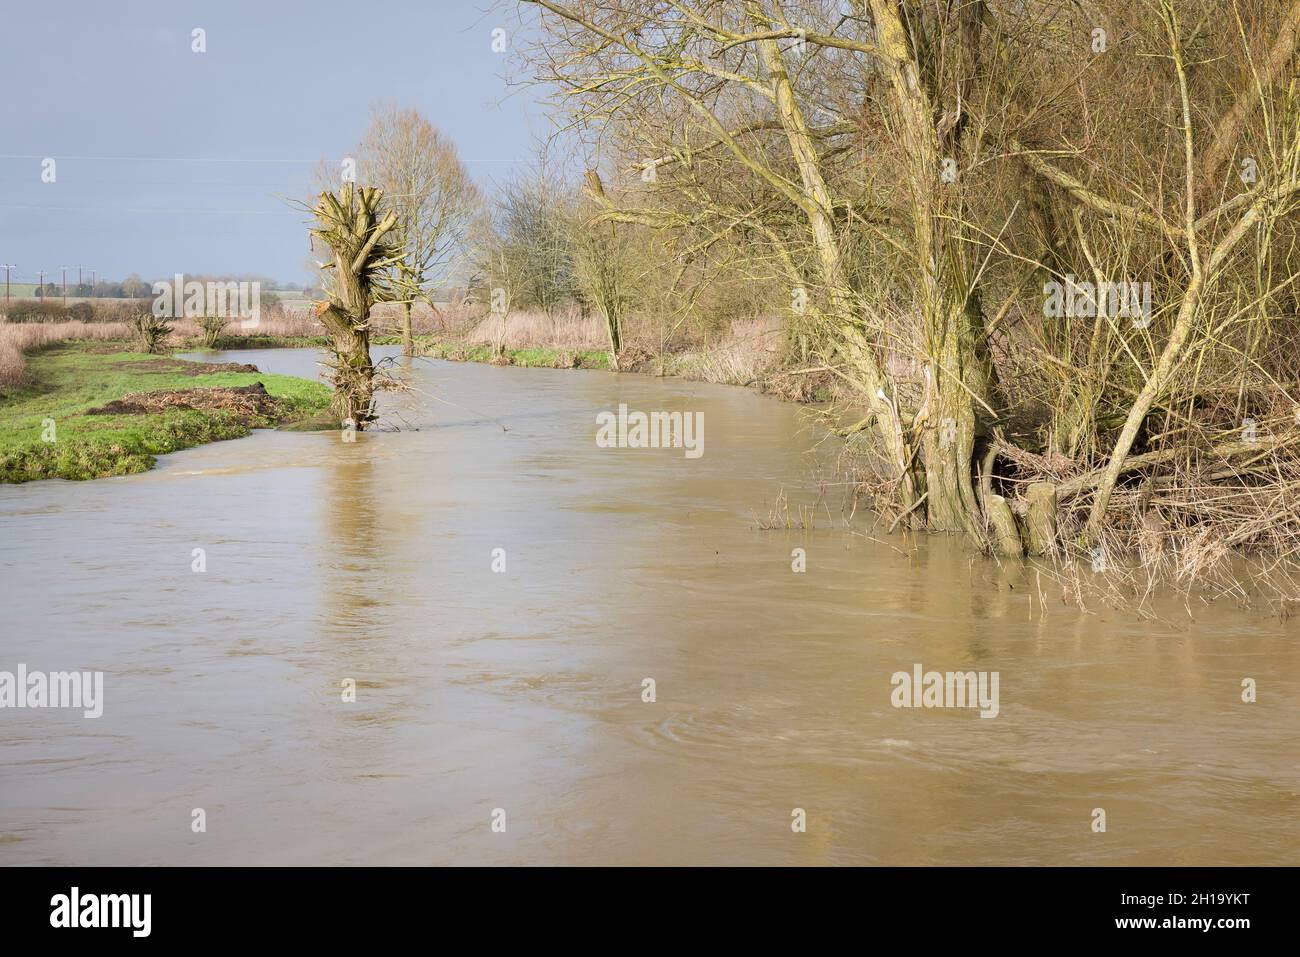 Flooding river, high water level in a swollen river, English countryside, Buckinghamshire, UK Stock Photo